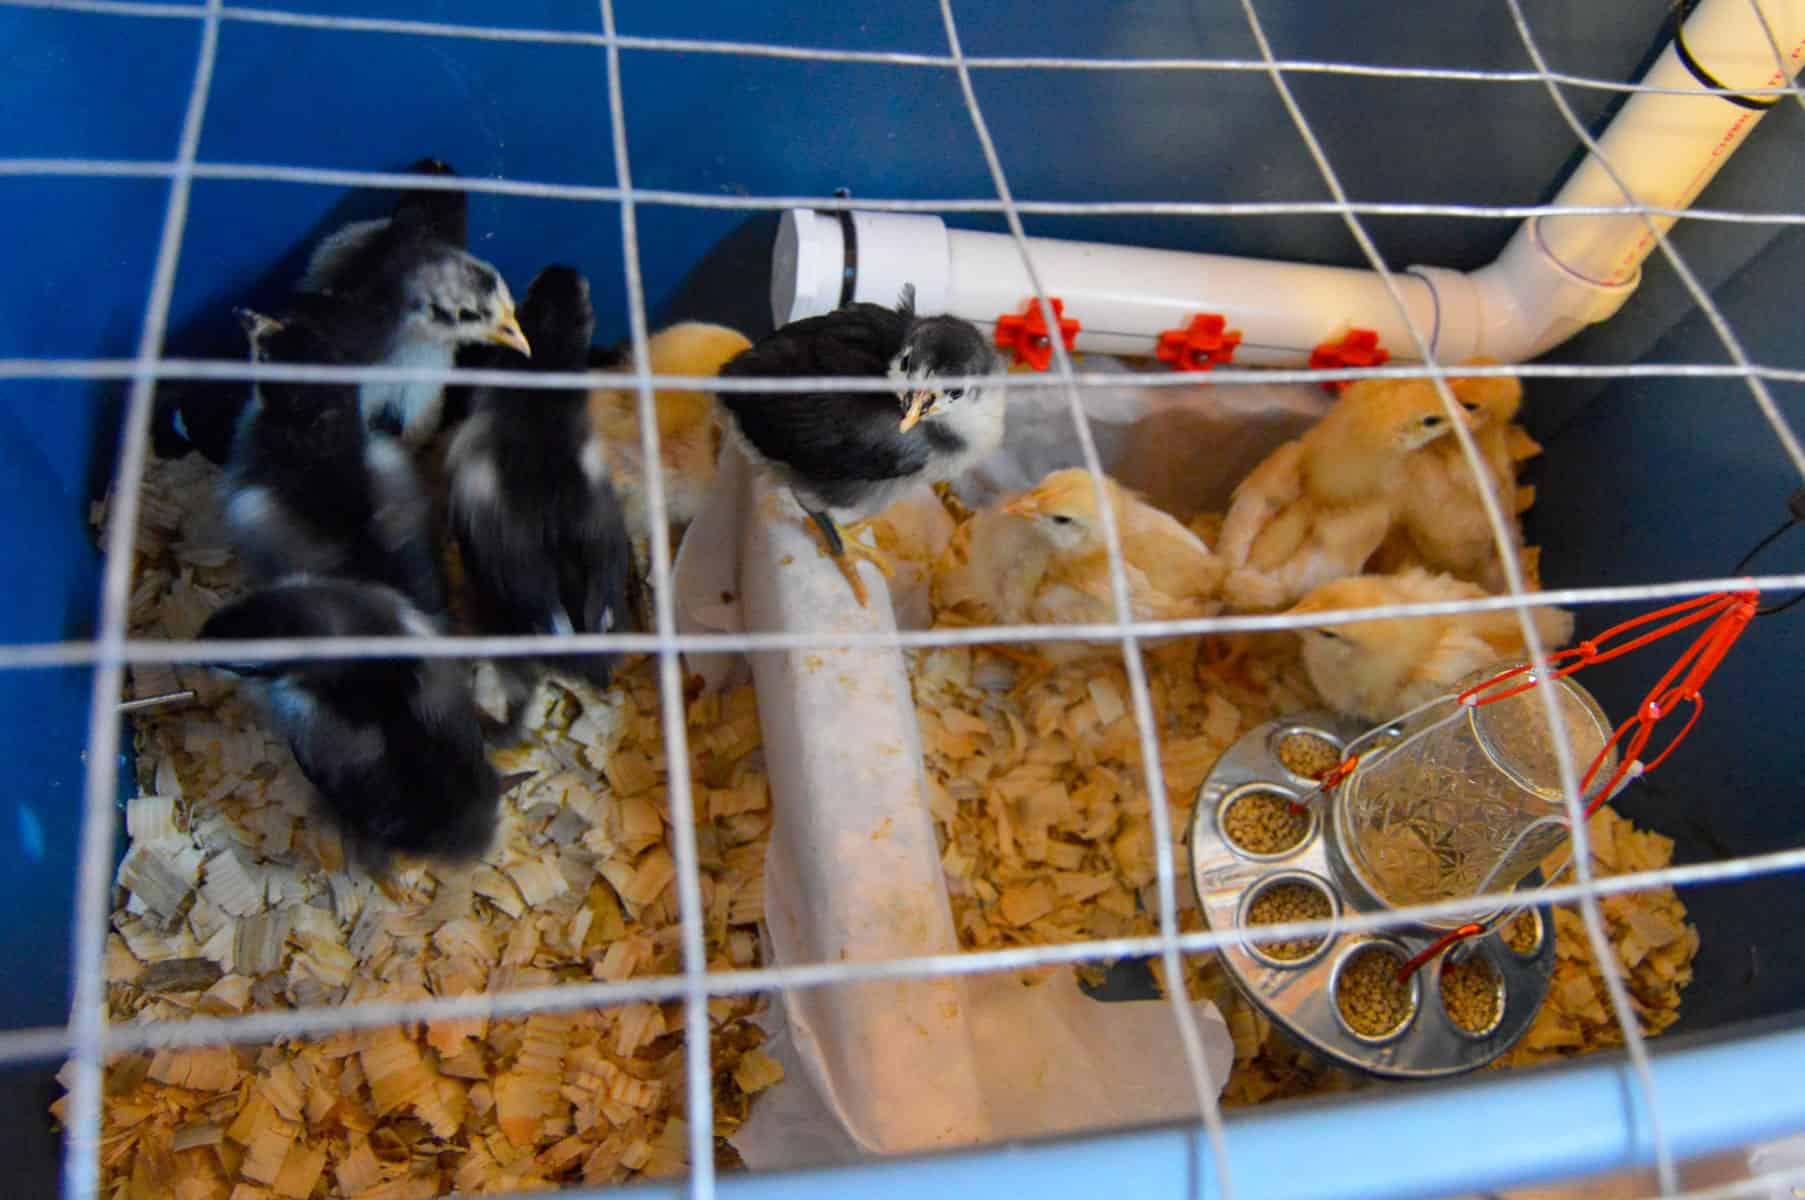 Chicks in our tub brooder with waterer, roost and feeder over pine flakes